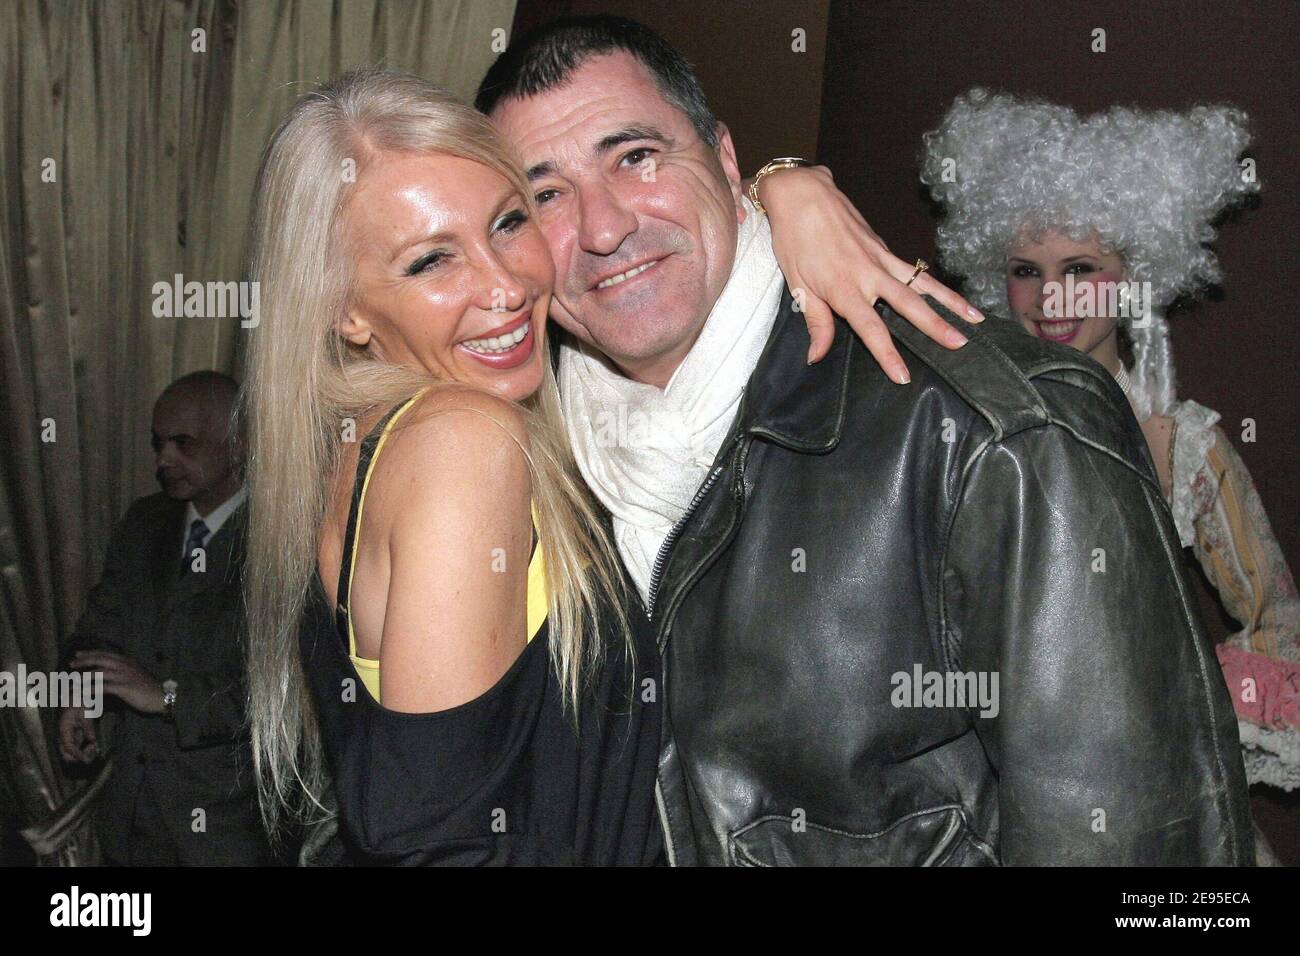 French actor Jean-Marie Bigard with his wife Claudia attend 'Le Bourgeois  Gentilhomme' premiere after party held at 'L'Etoile' in Paris, France, on  January 20, 2006. Photo by Benoit Pinguet/ABACAPRESS.COM Stock Photo -